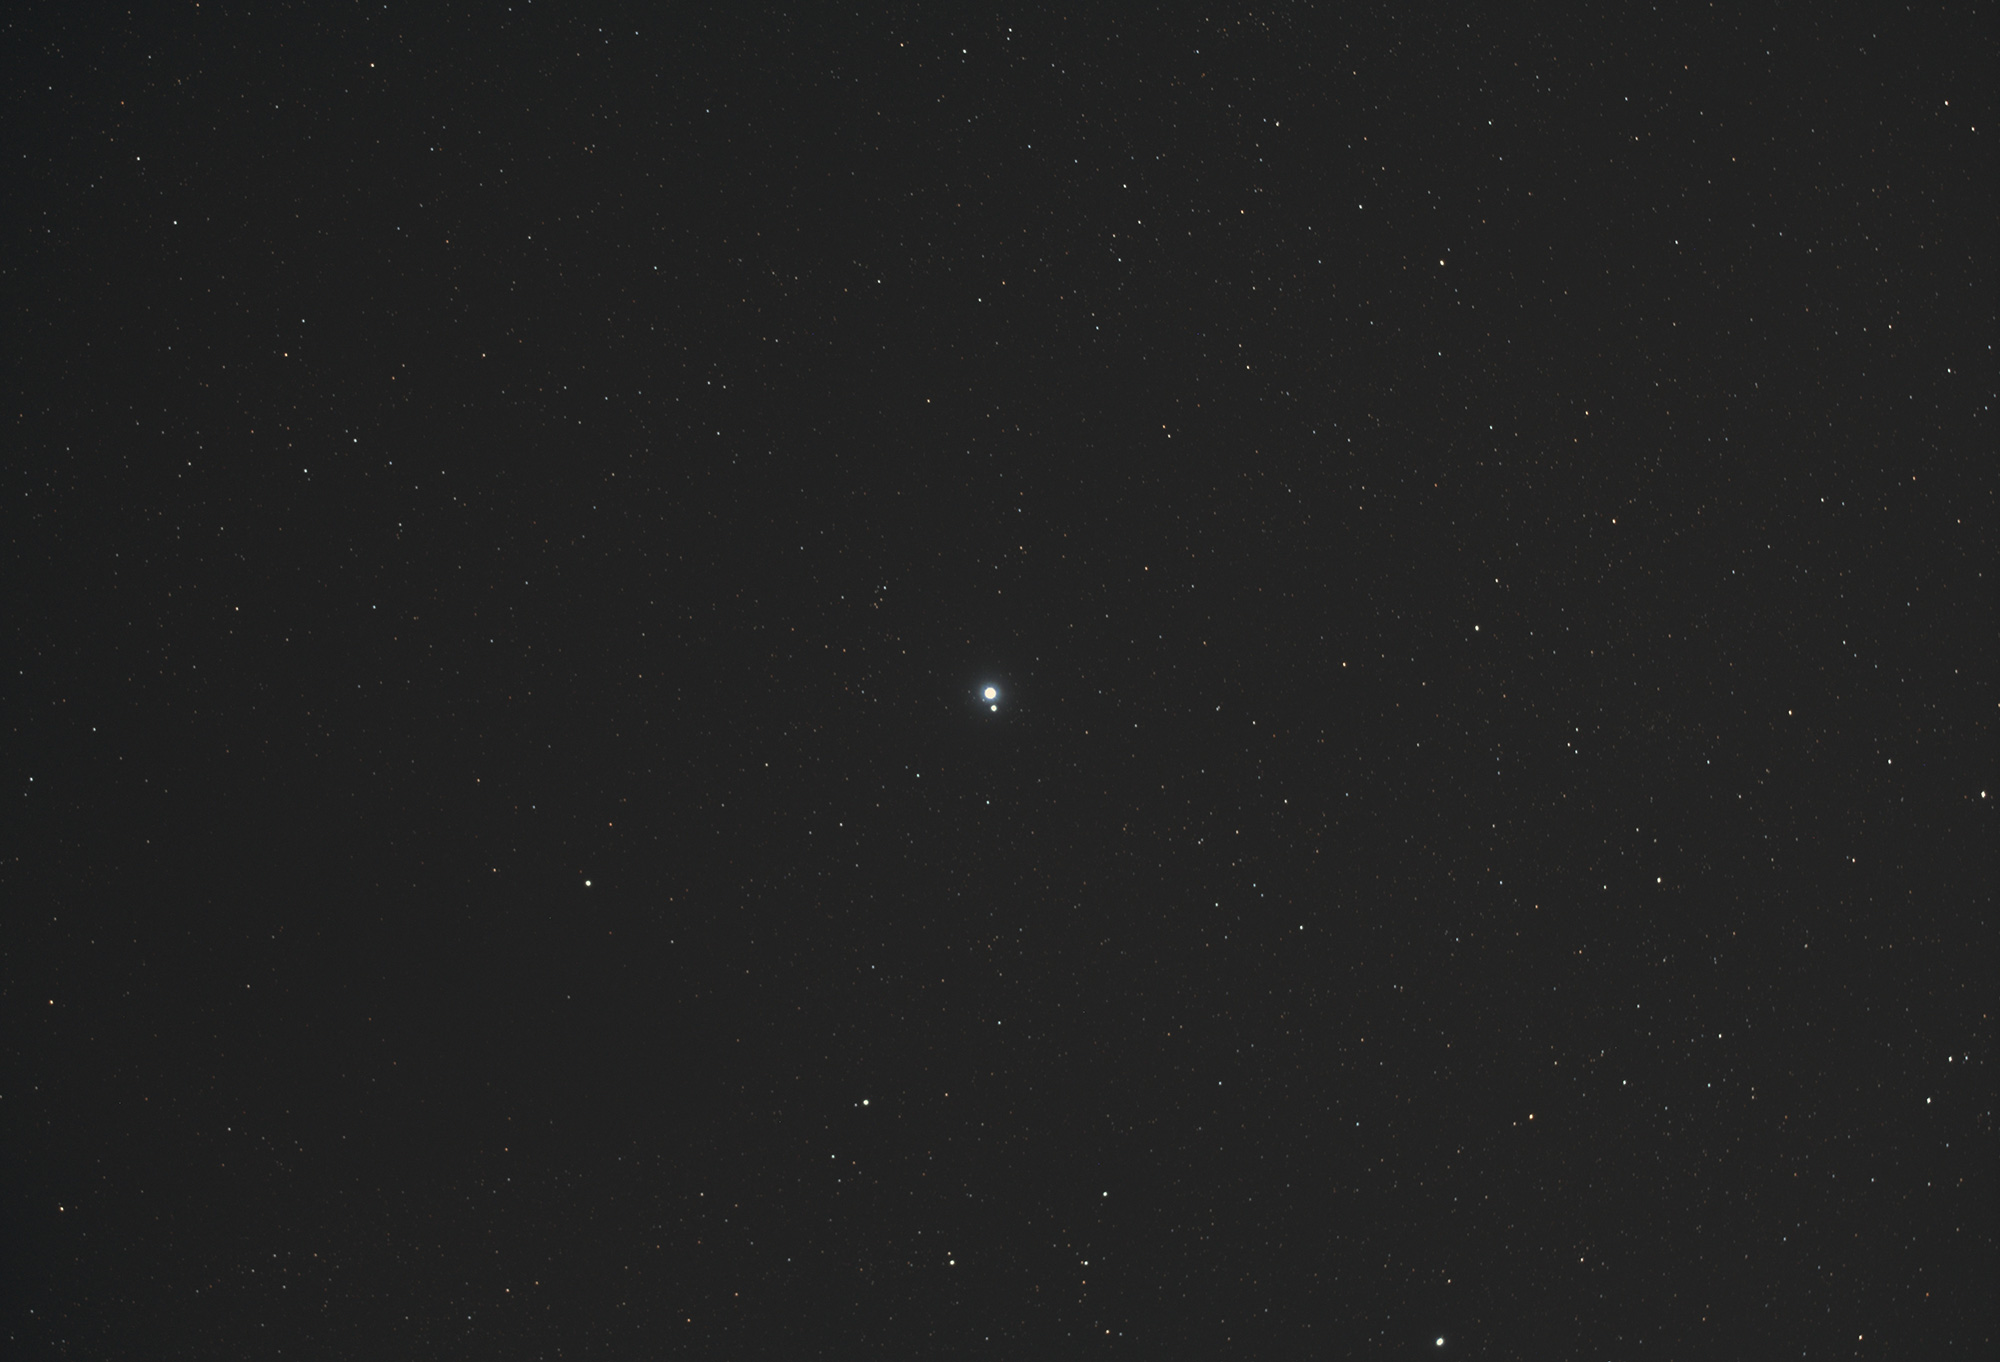 PHD2 Guiding with Star Adventurer Mount - 3 minute single exposure of Acrux